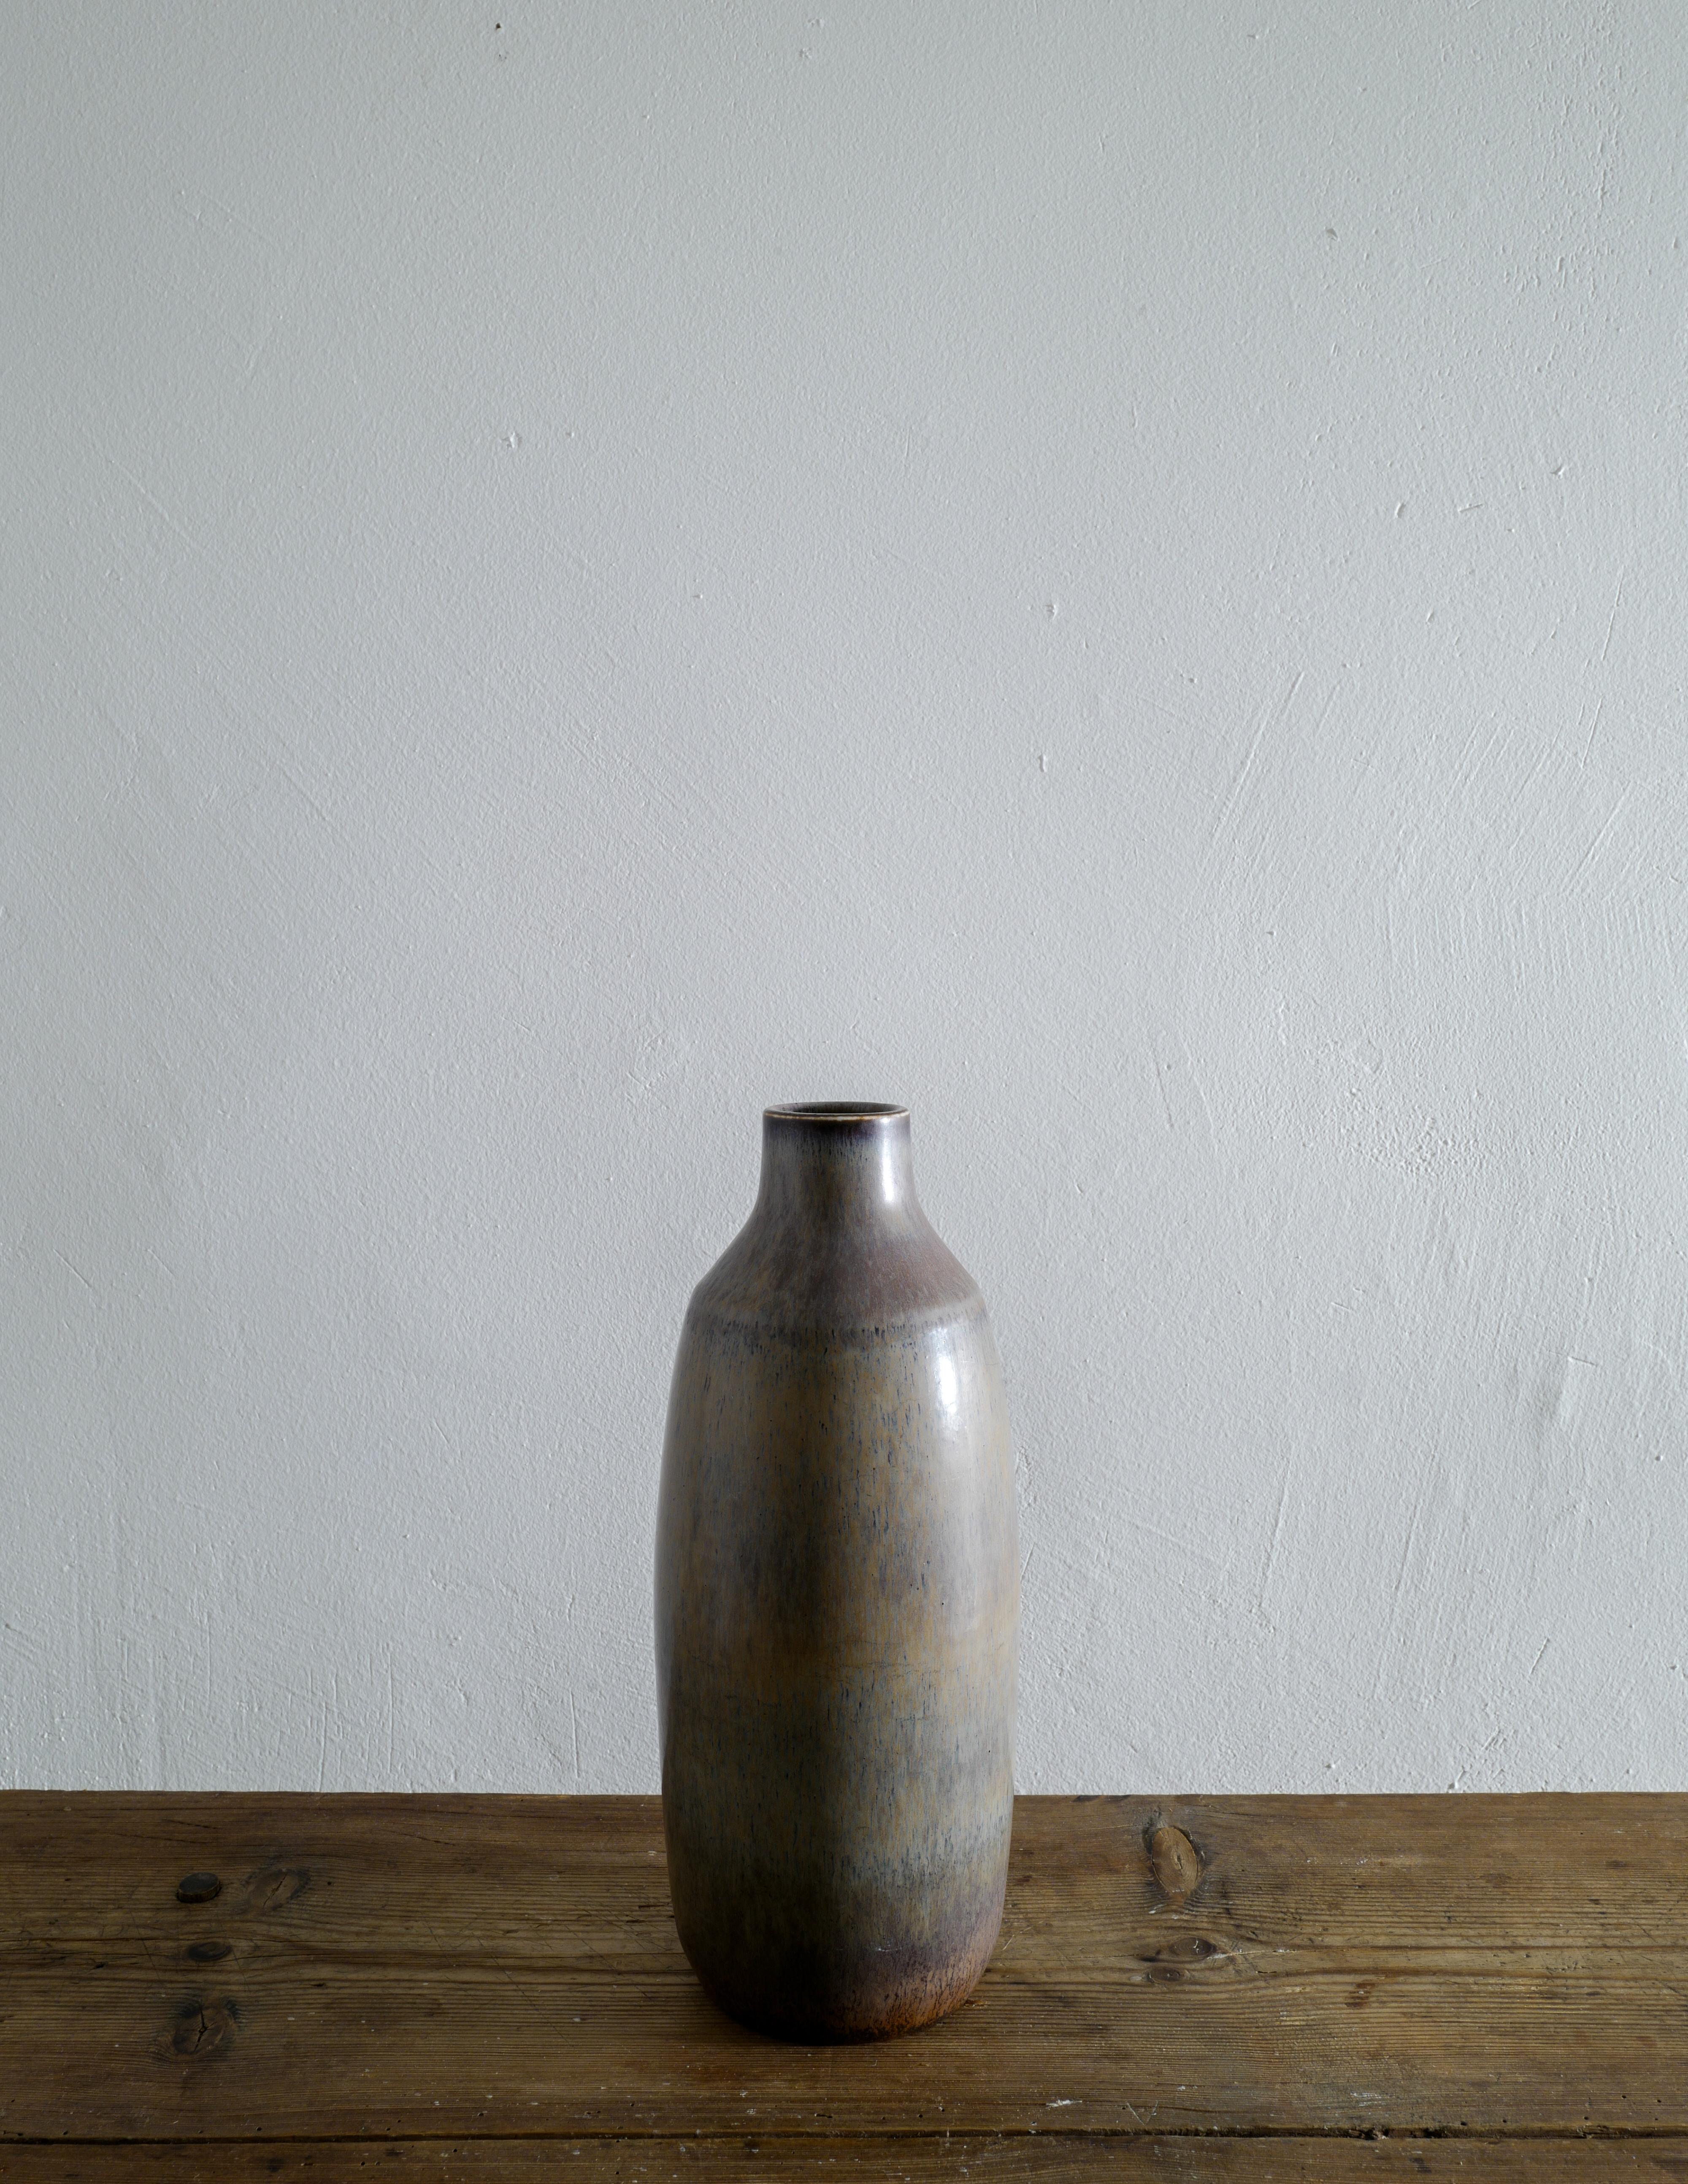 Rare Carl-Harry Stålhane vase in a gray / brown / green glaze in great vintage condition with small signs from age and use. Produced in Sweden for Rörstrand in the 1950s. Signed. 

Height: 34 cm 
Diameter: 14 cm